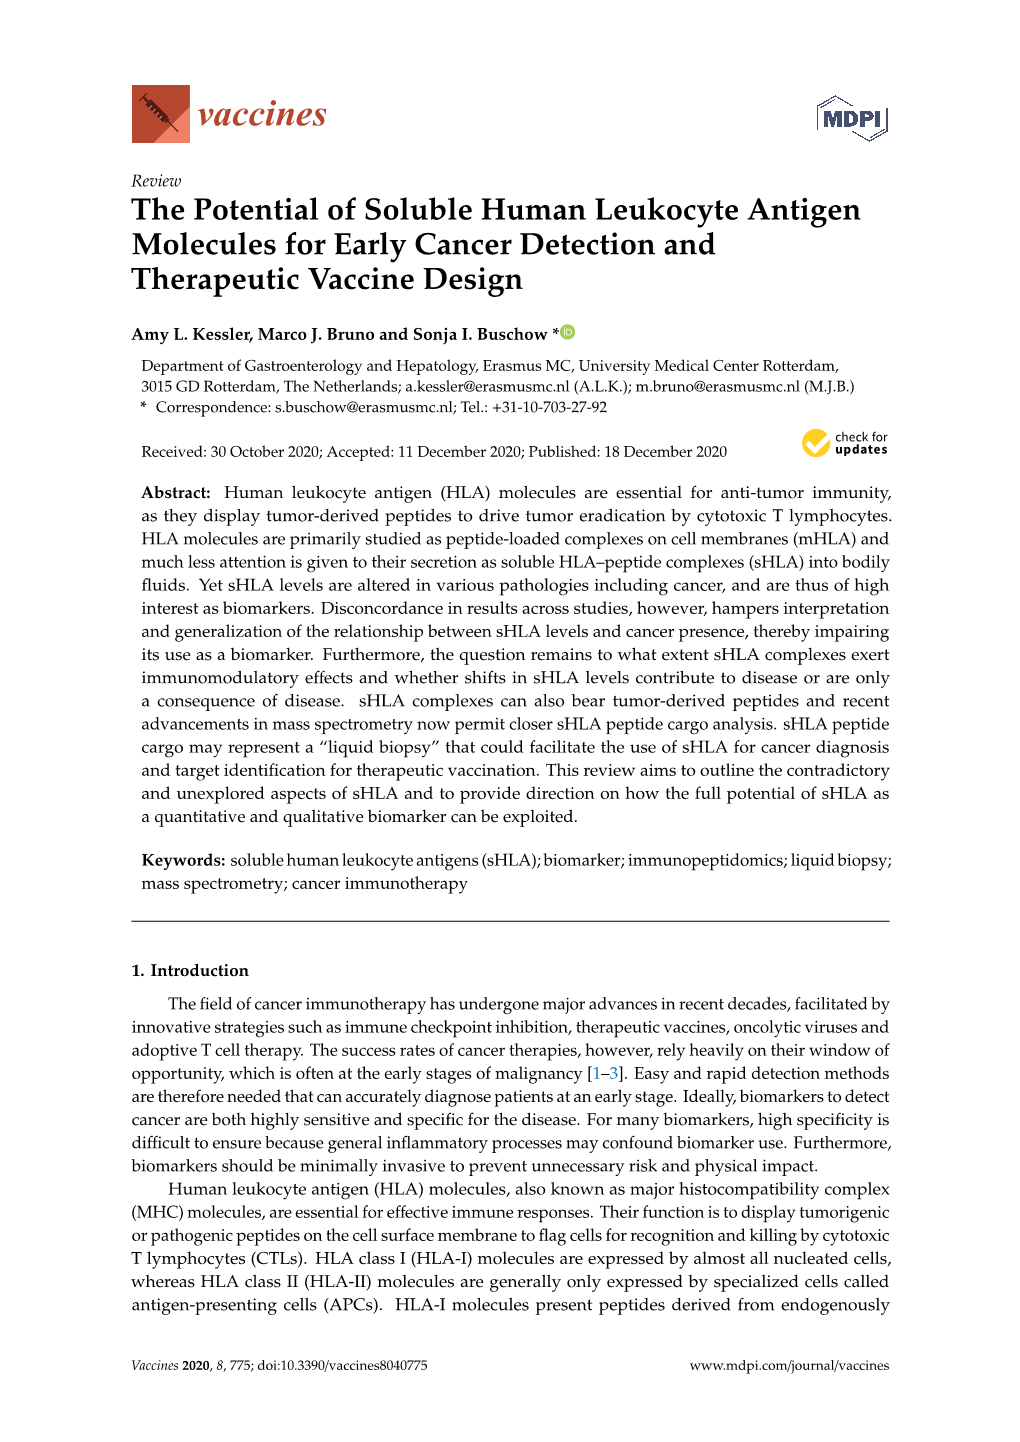 The Potential of Soluble Human Leukocyte Antigen Molecules for Early Cancer Detection and Therapeutic Vaccine Design